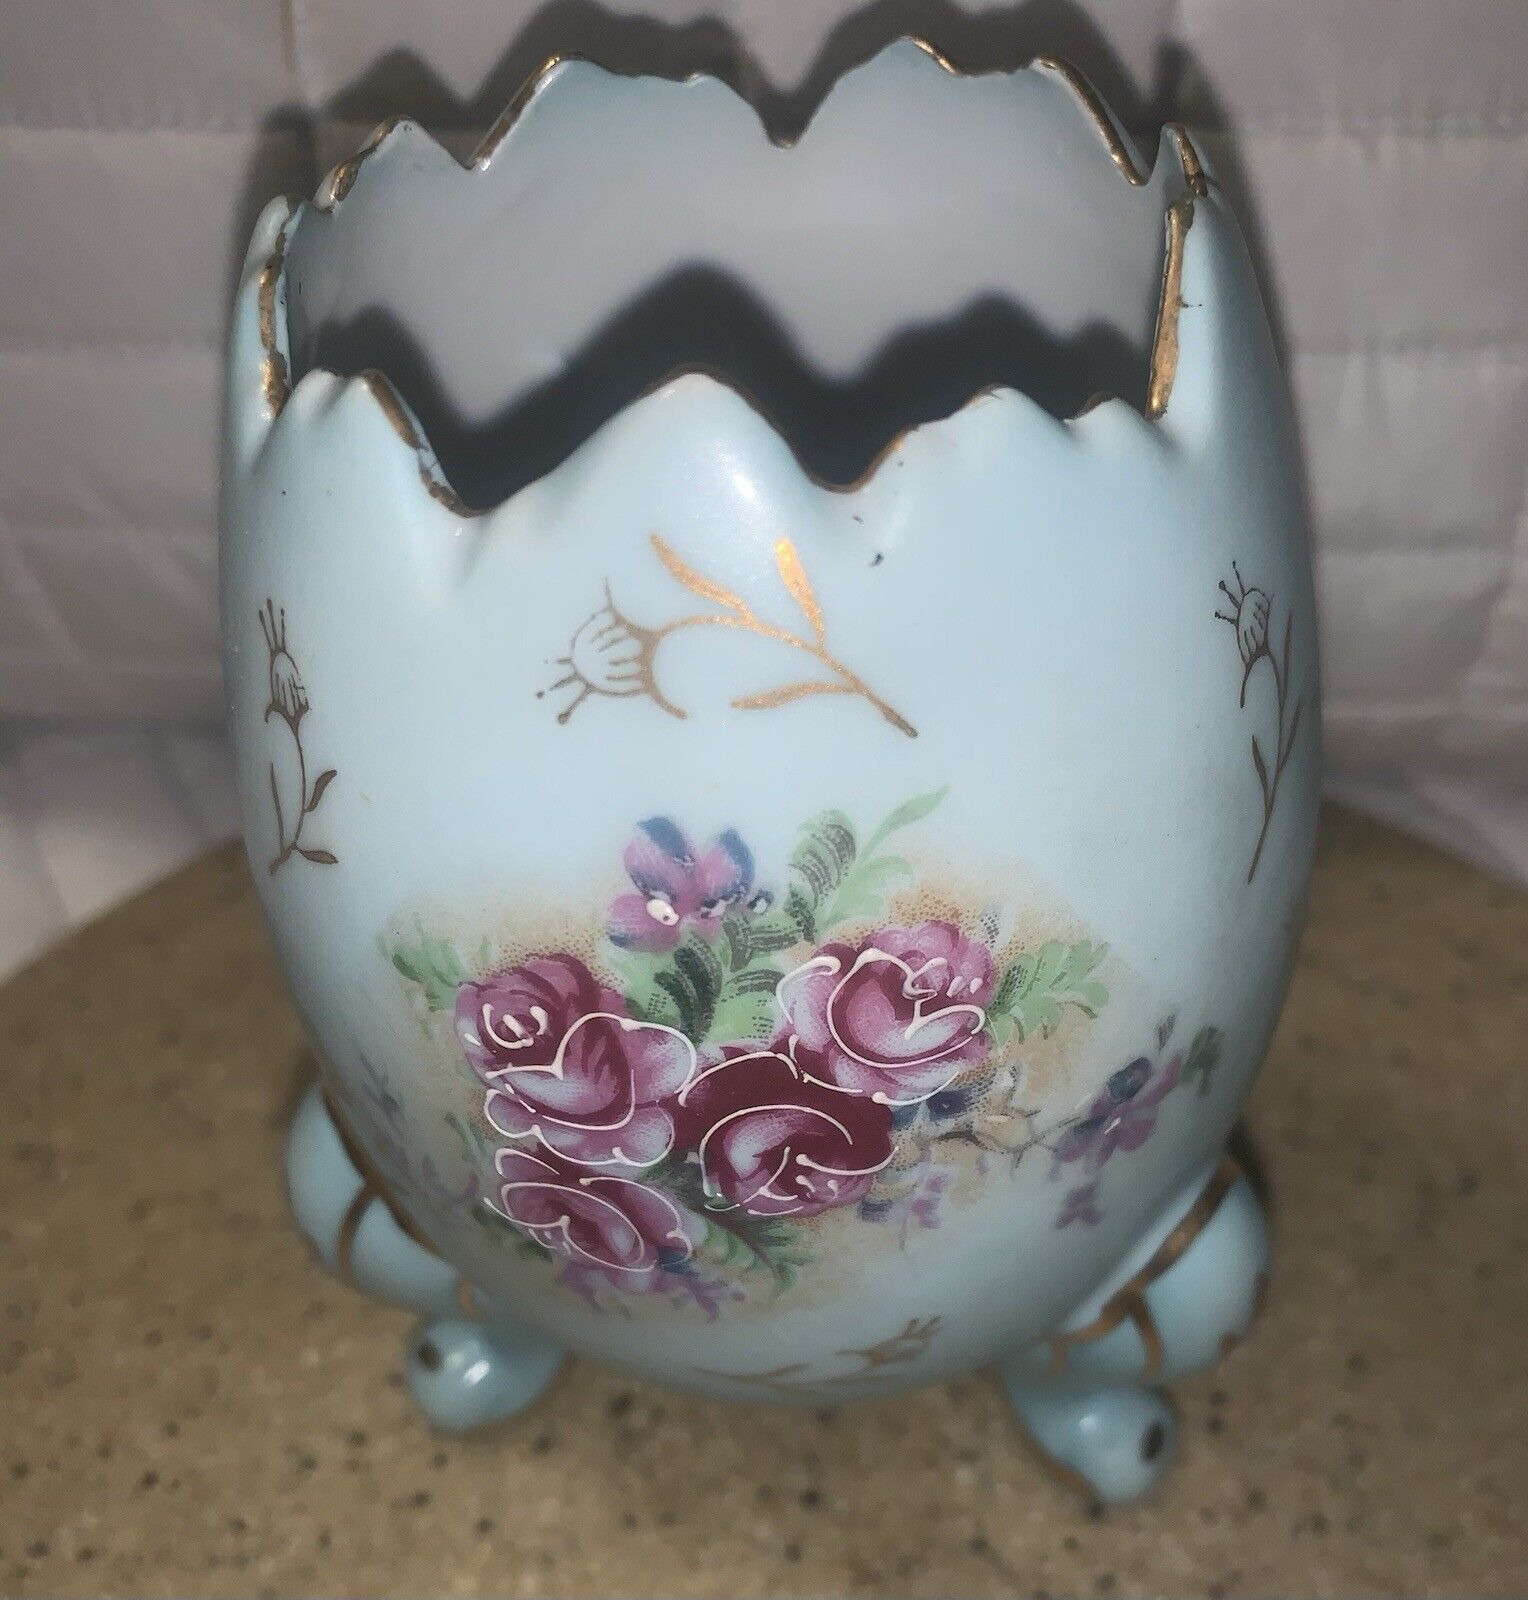 Vtg. 1962 Inarco Footed Egg Vase E-116/M Gold Trim and Roses